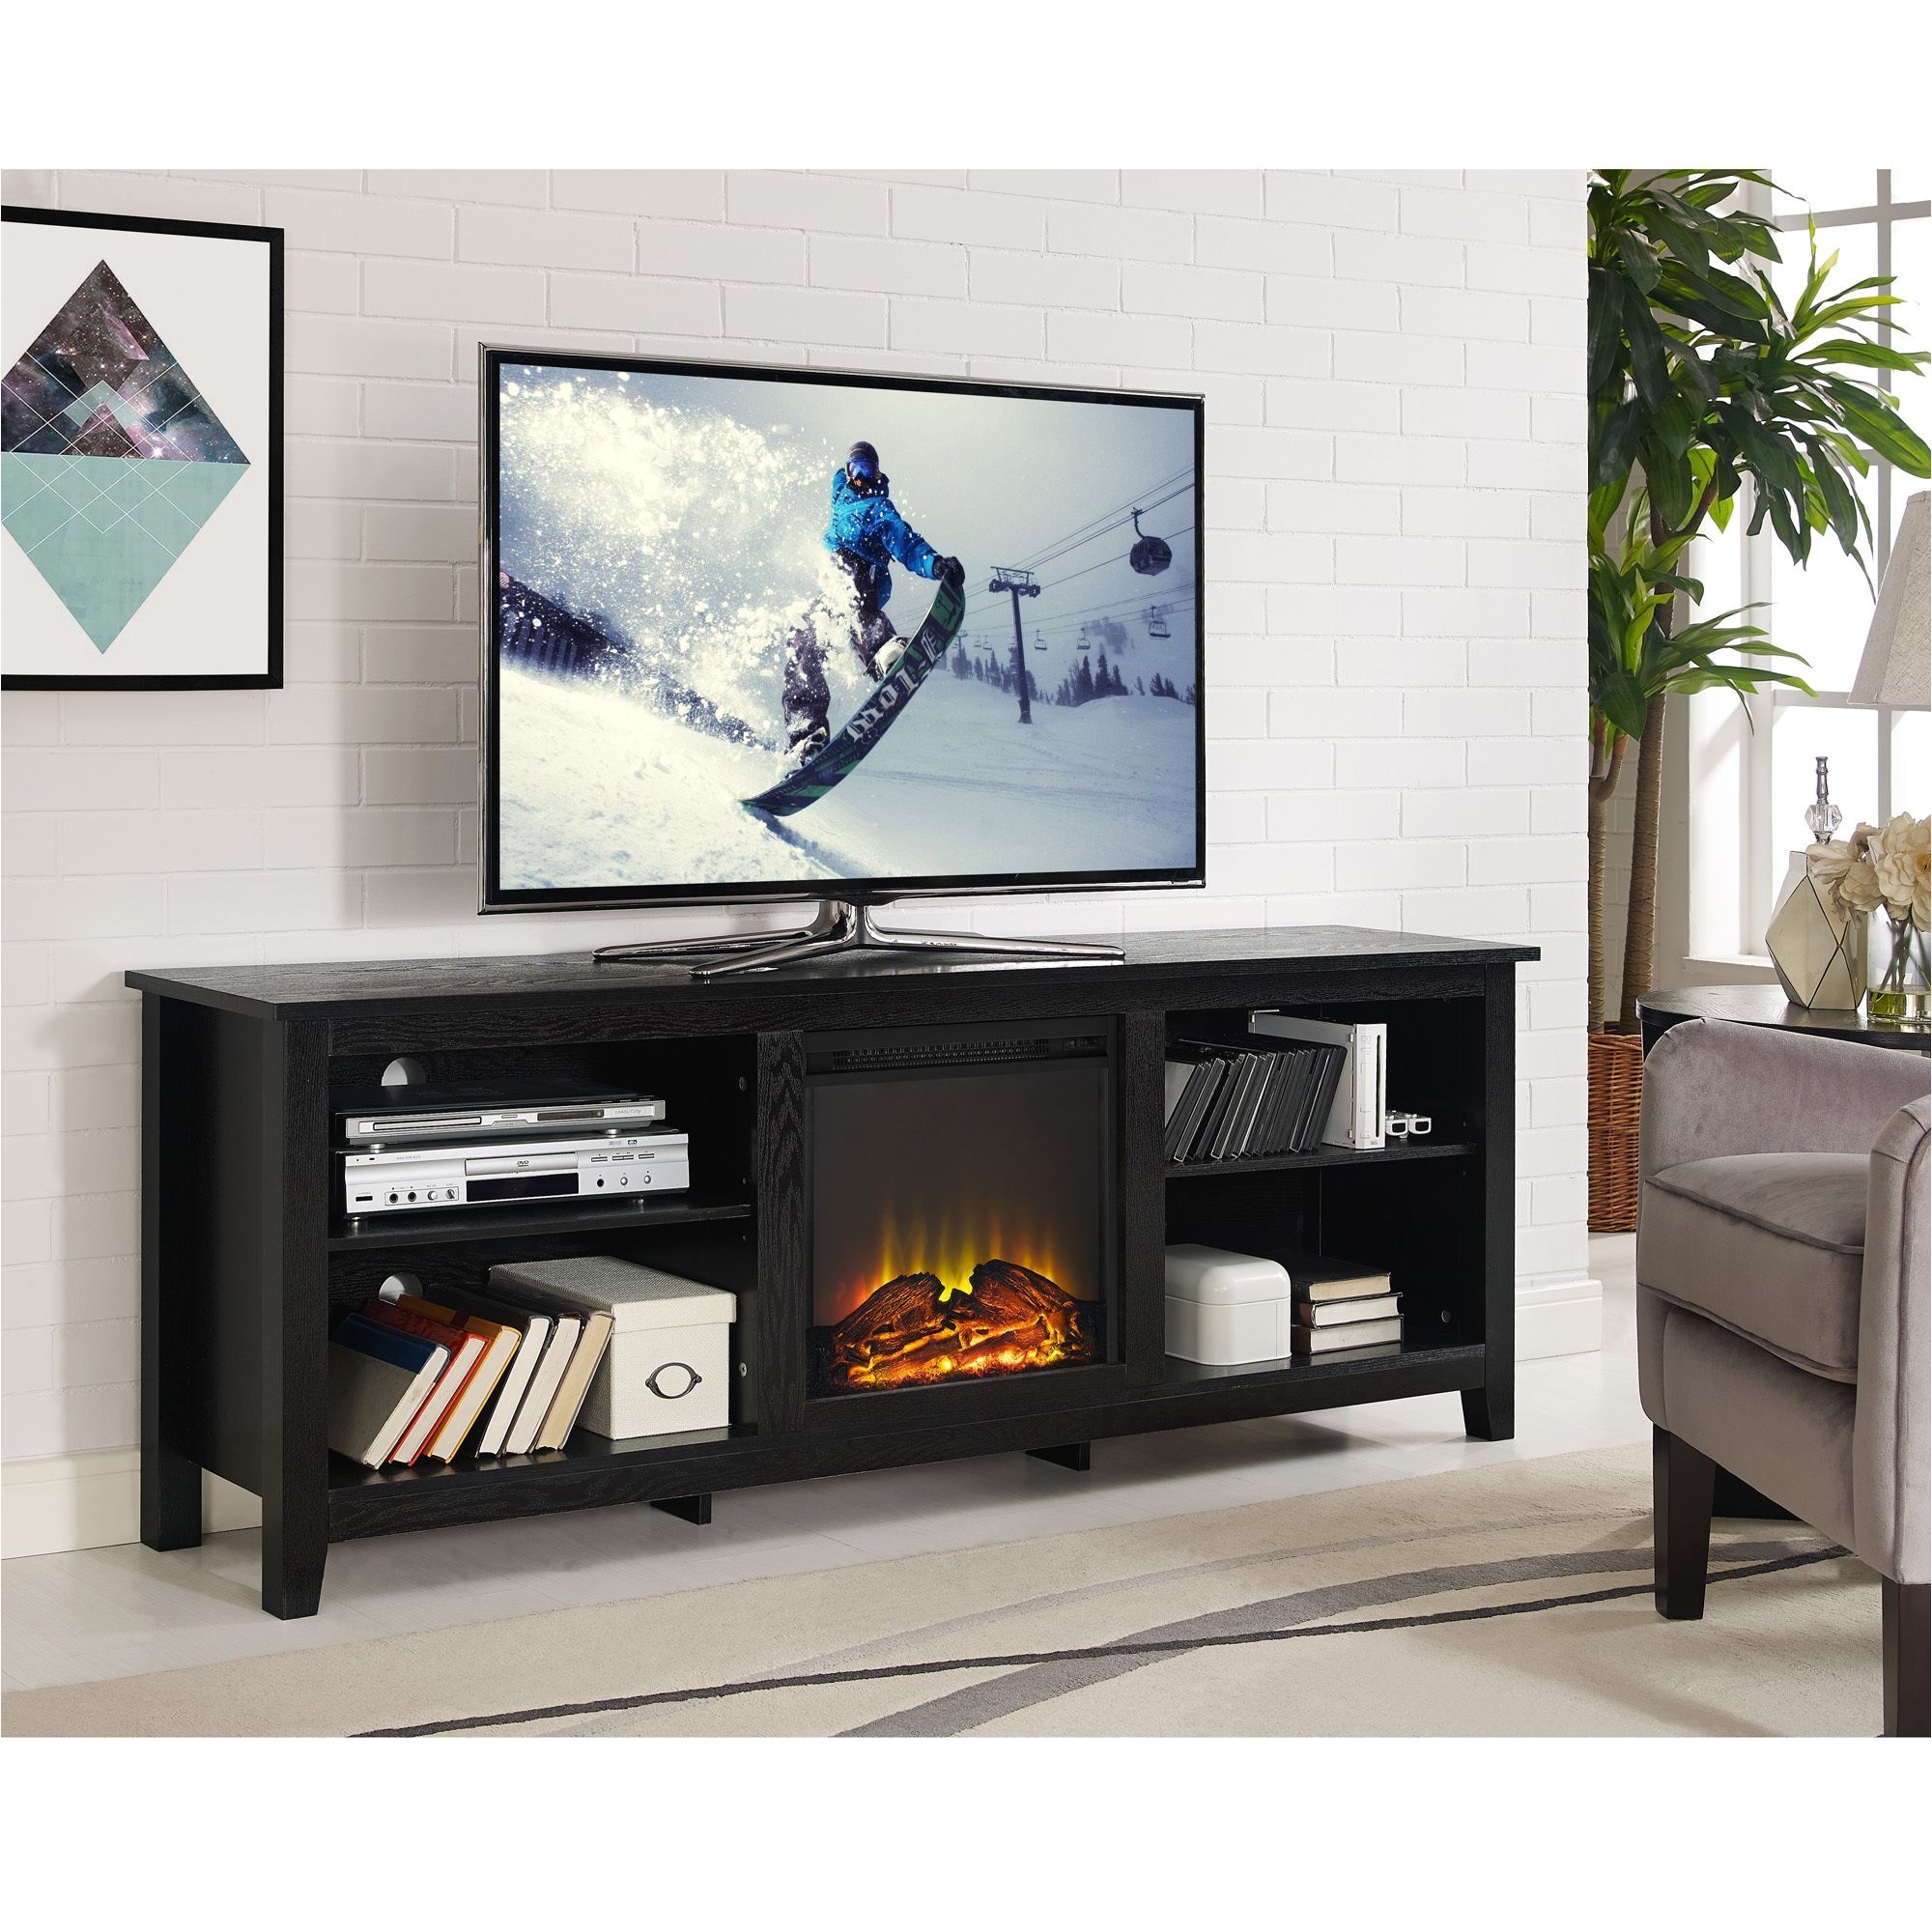 Entertainment Center with Fireplace Insert 70 Inch Black Fireplace Tv Stand 70 Fireplace Tv Stand Black